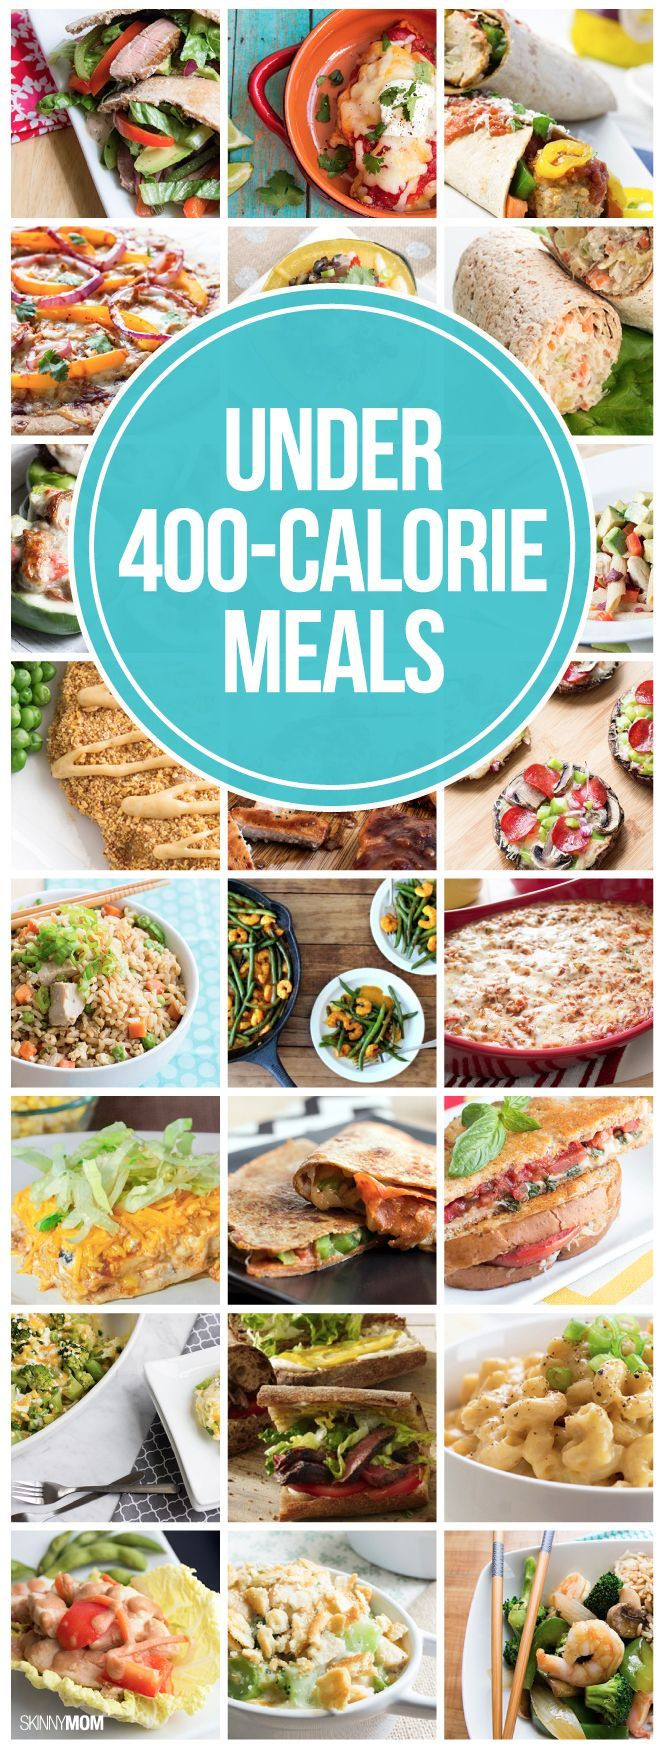 Low Calorie Dinners For Family
 40 Healthy Dinners Under 400 Calories RECIPES